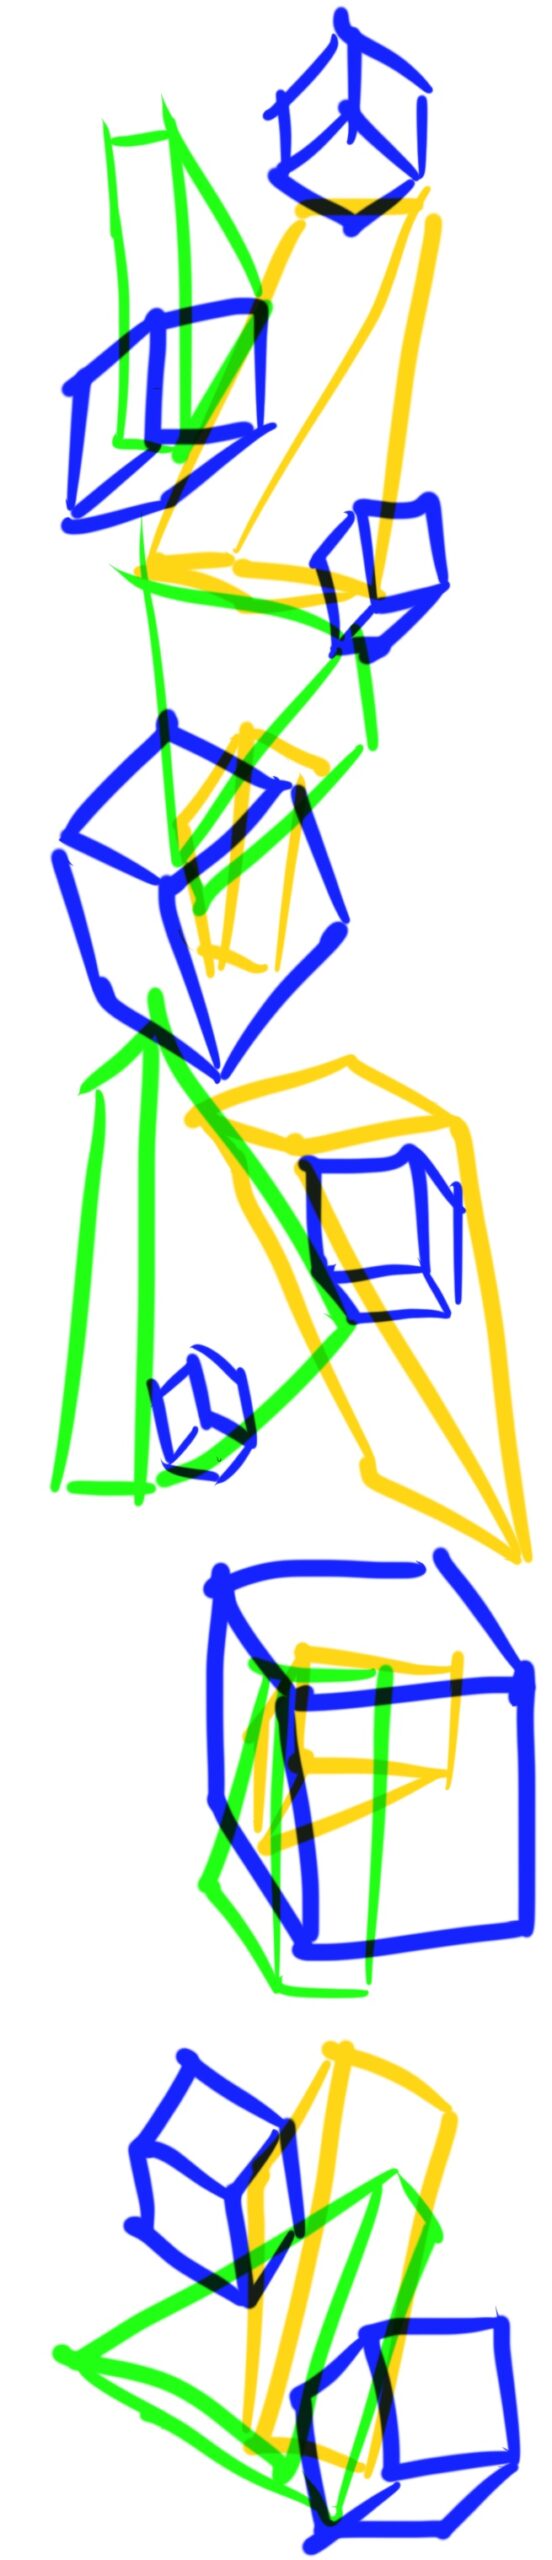 Illustration of blocks in yellow, green, and blue